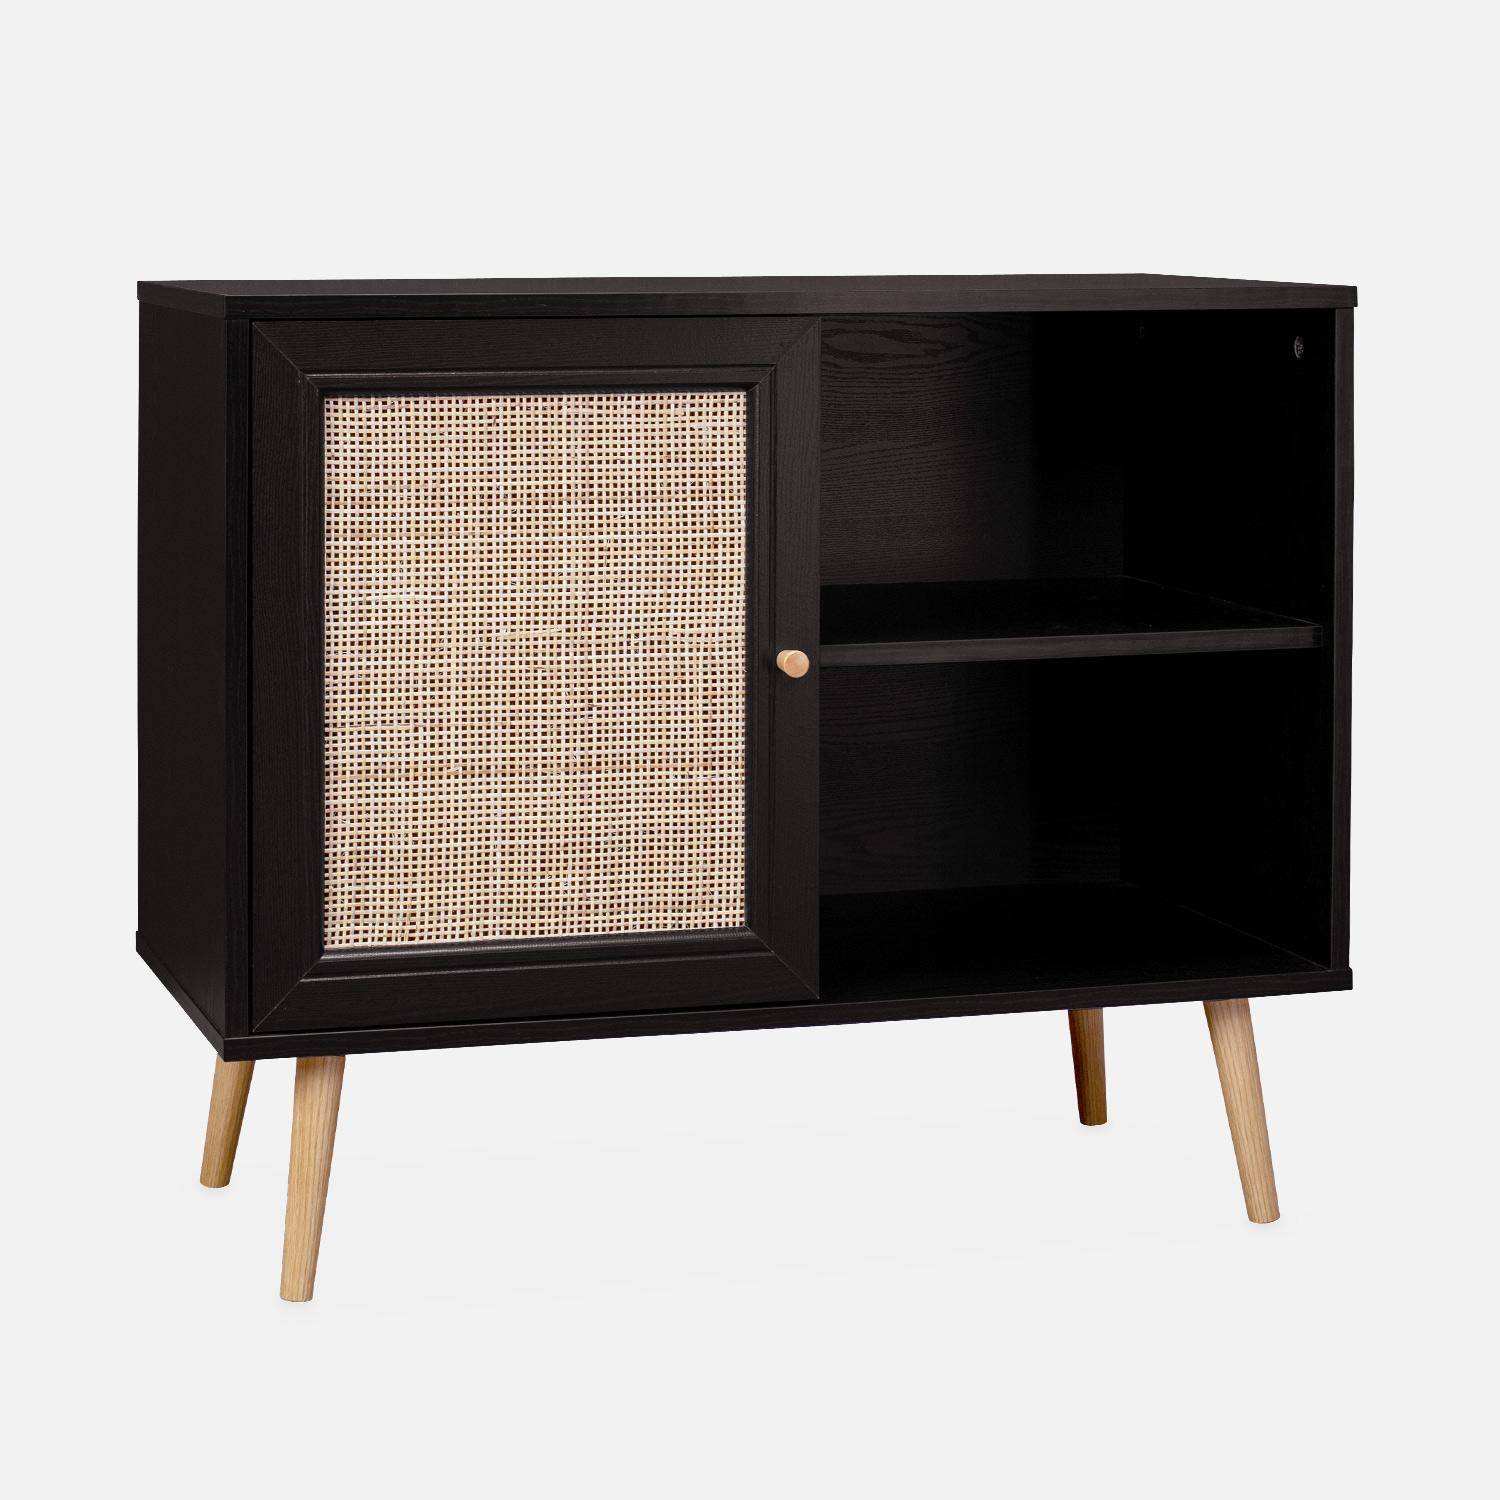 Wooden and cane rattan detail storage cabinet with 2 shelves, 1 cupboard, Scandi-style legs, 80x39x65.8cm - Boheme - Black Photo2